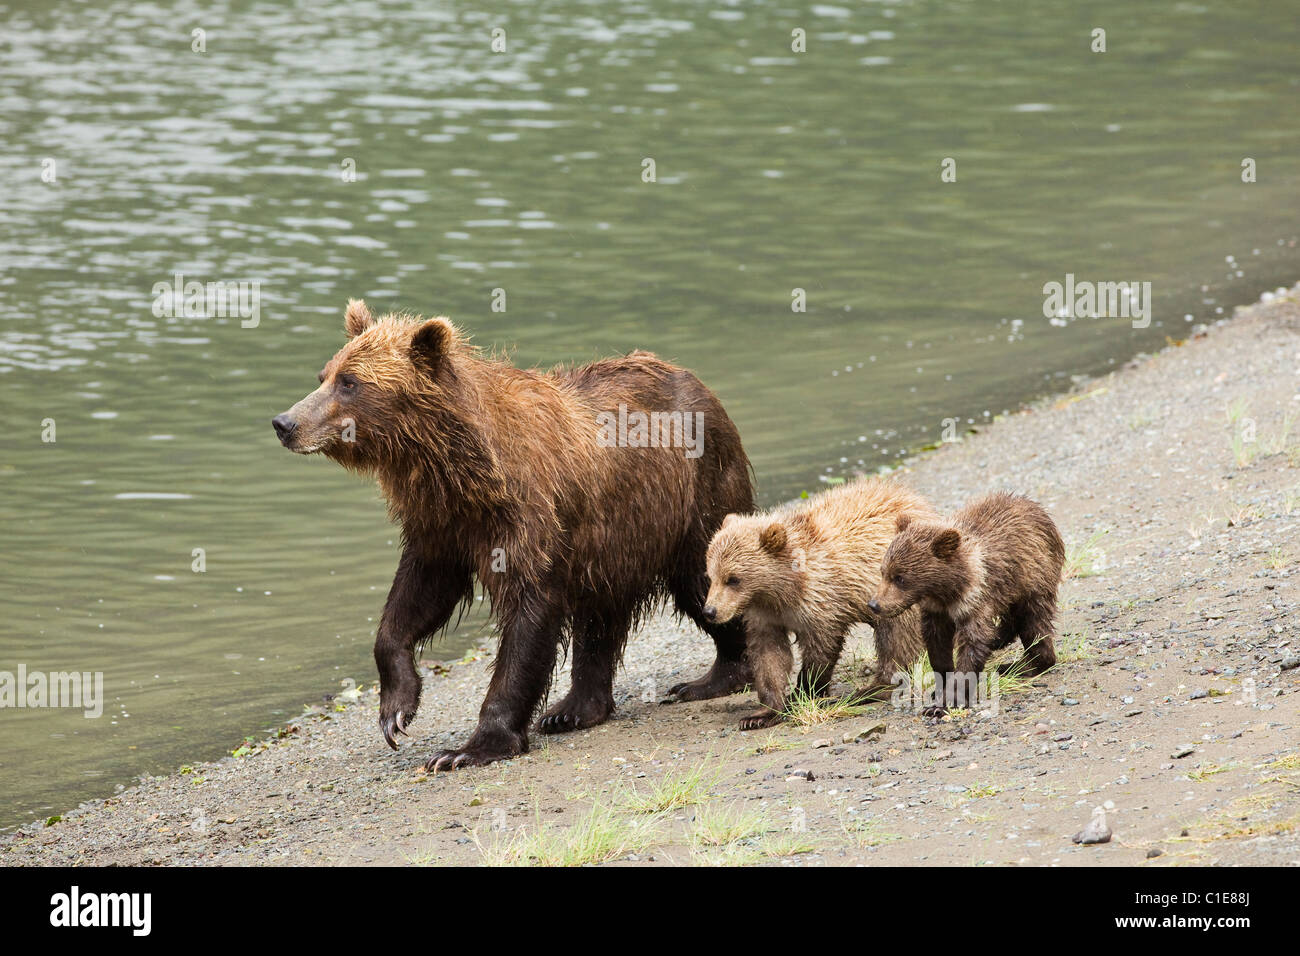 Sow brown bear and cubs near Horn Creek looking for spawning salmon in Chinitna Bay area of Lake Clark National Park, Alaska. Stock Photo